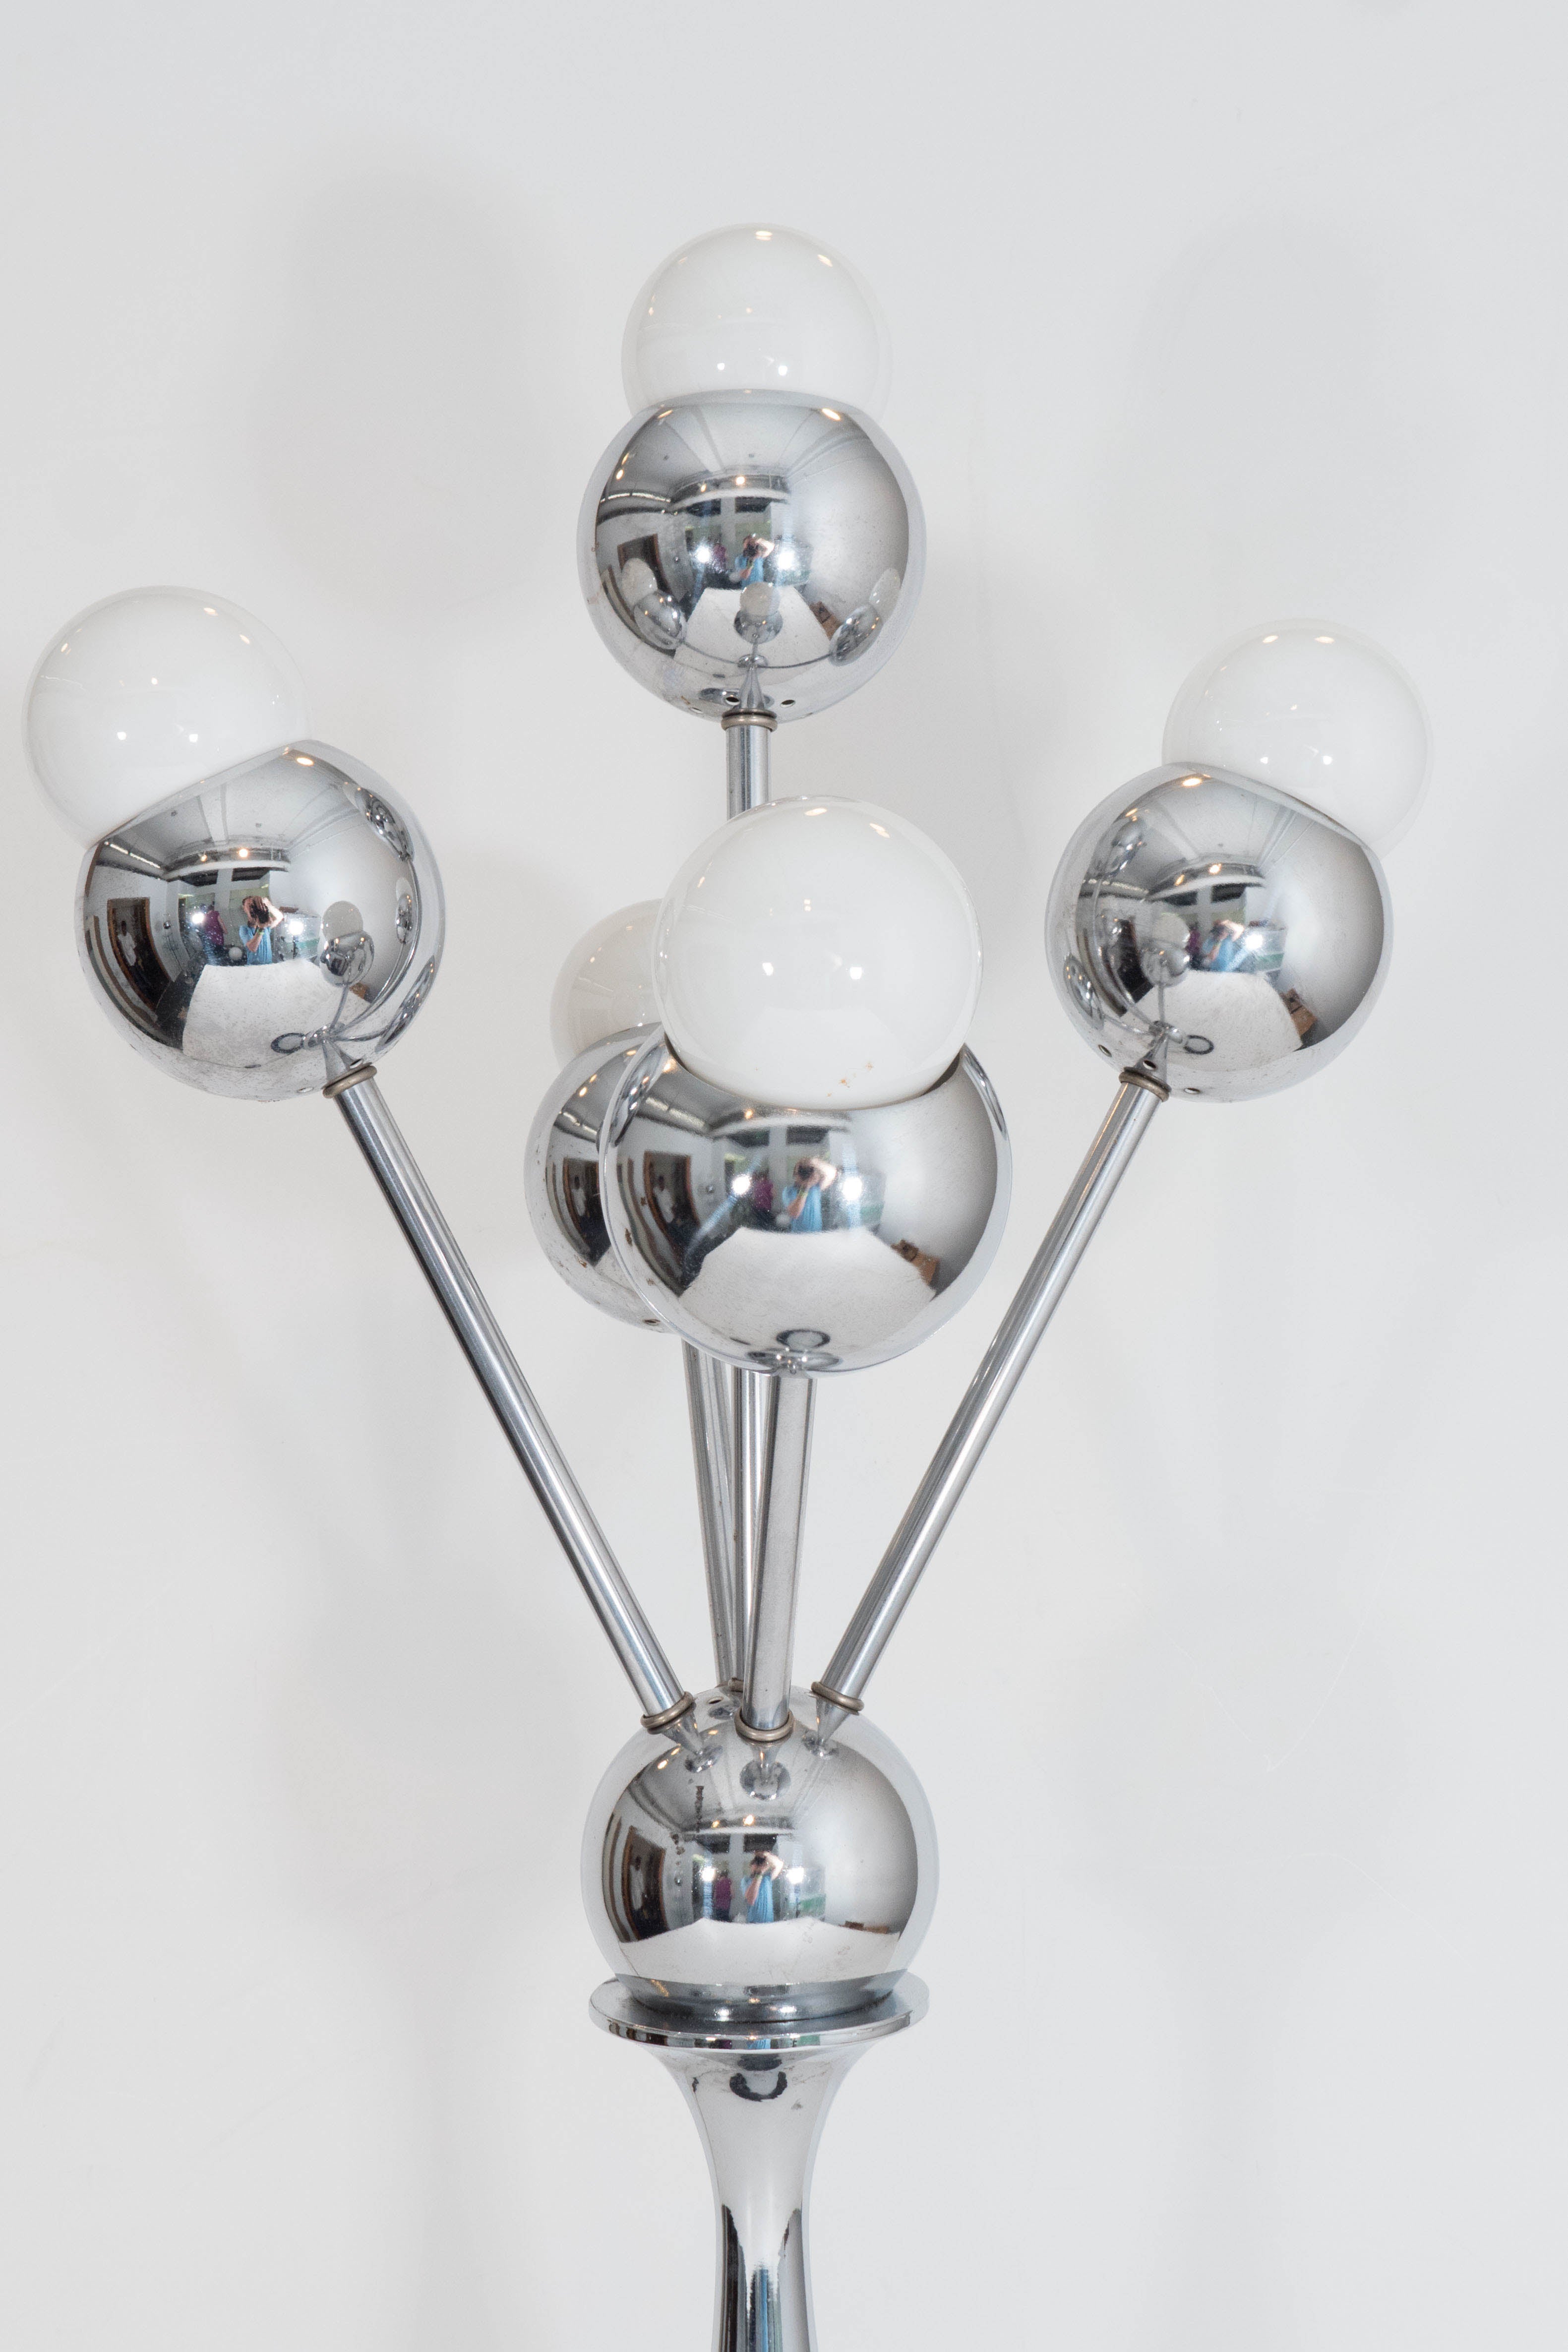 Pair of Space Age 1970s Chrome Table Lamps with Five Radiating Lights 1